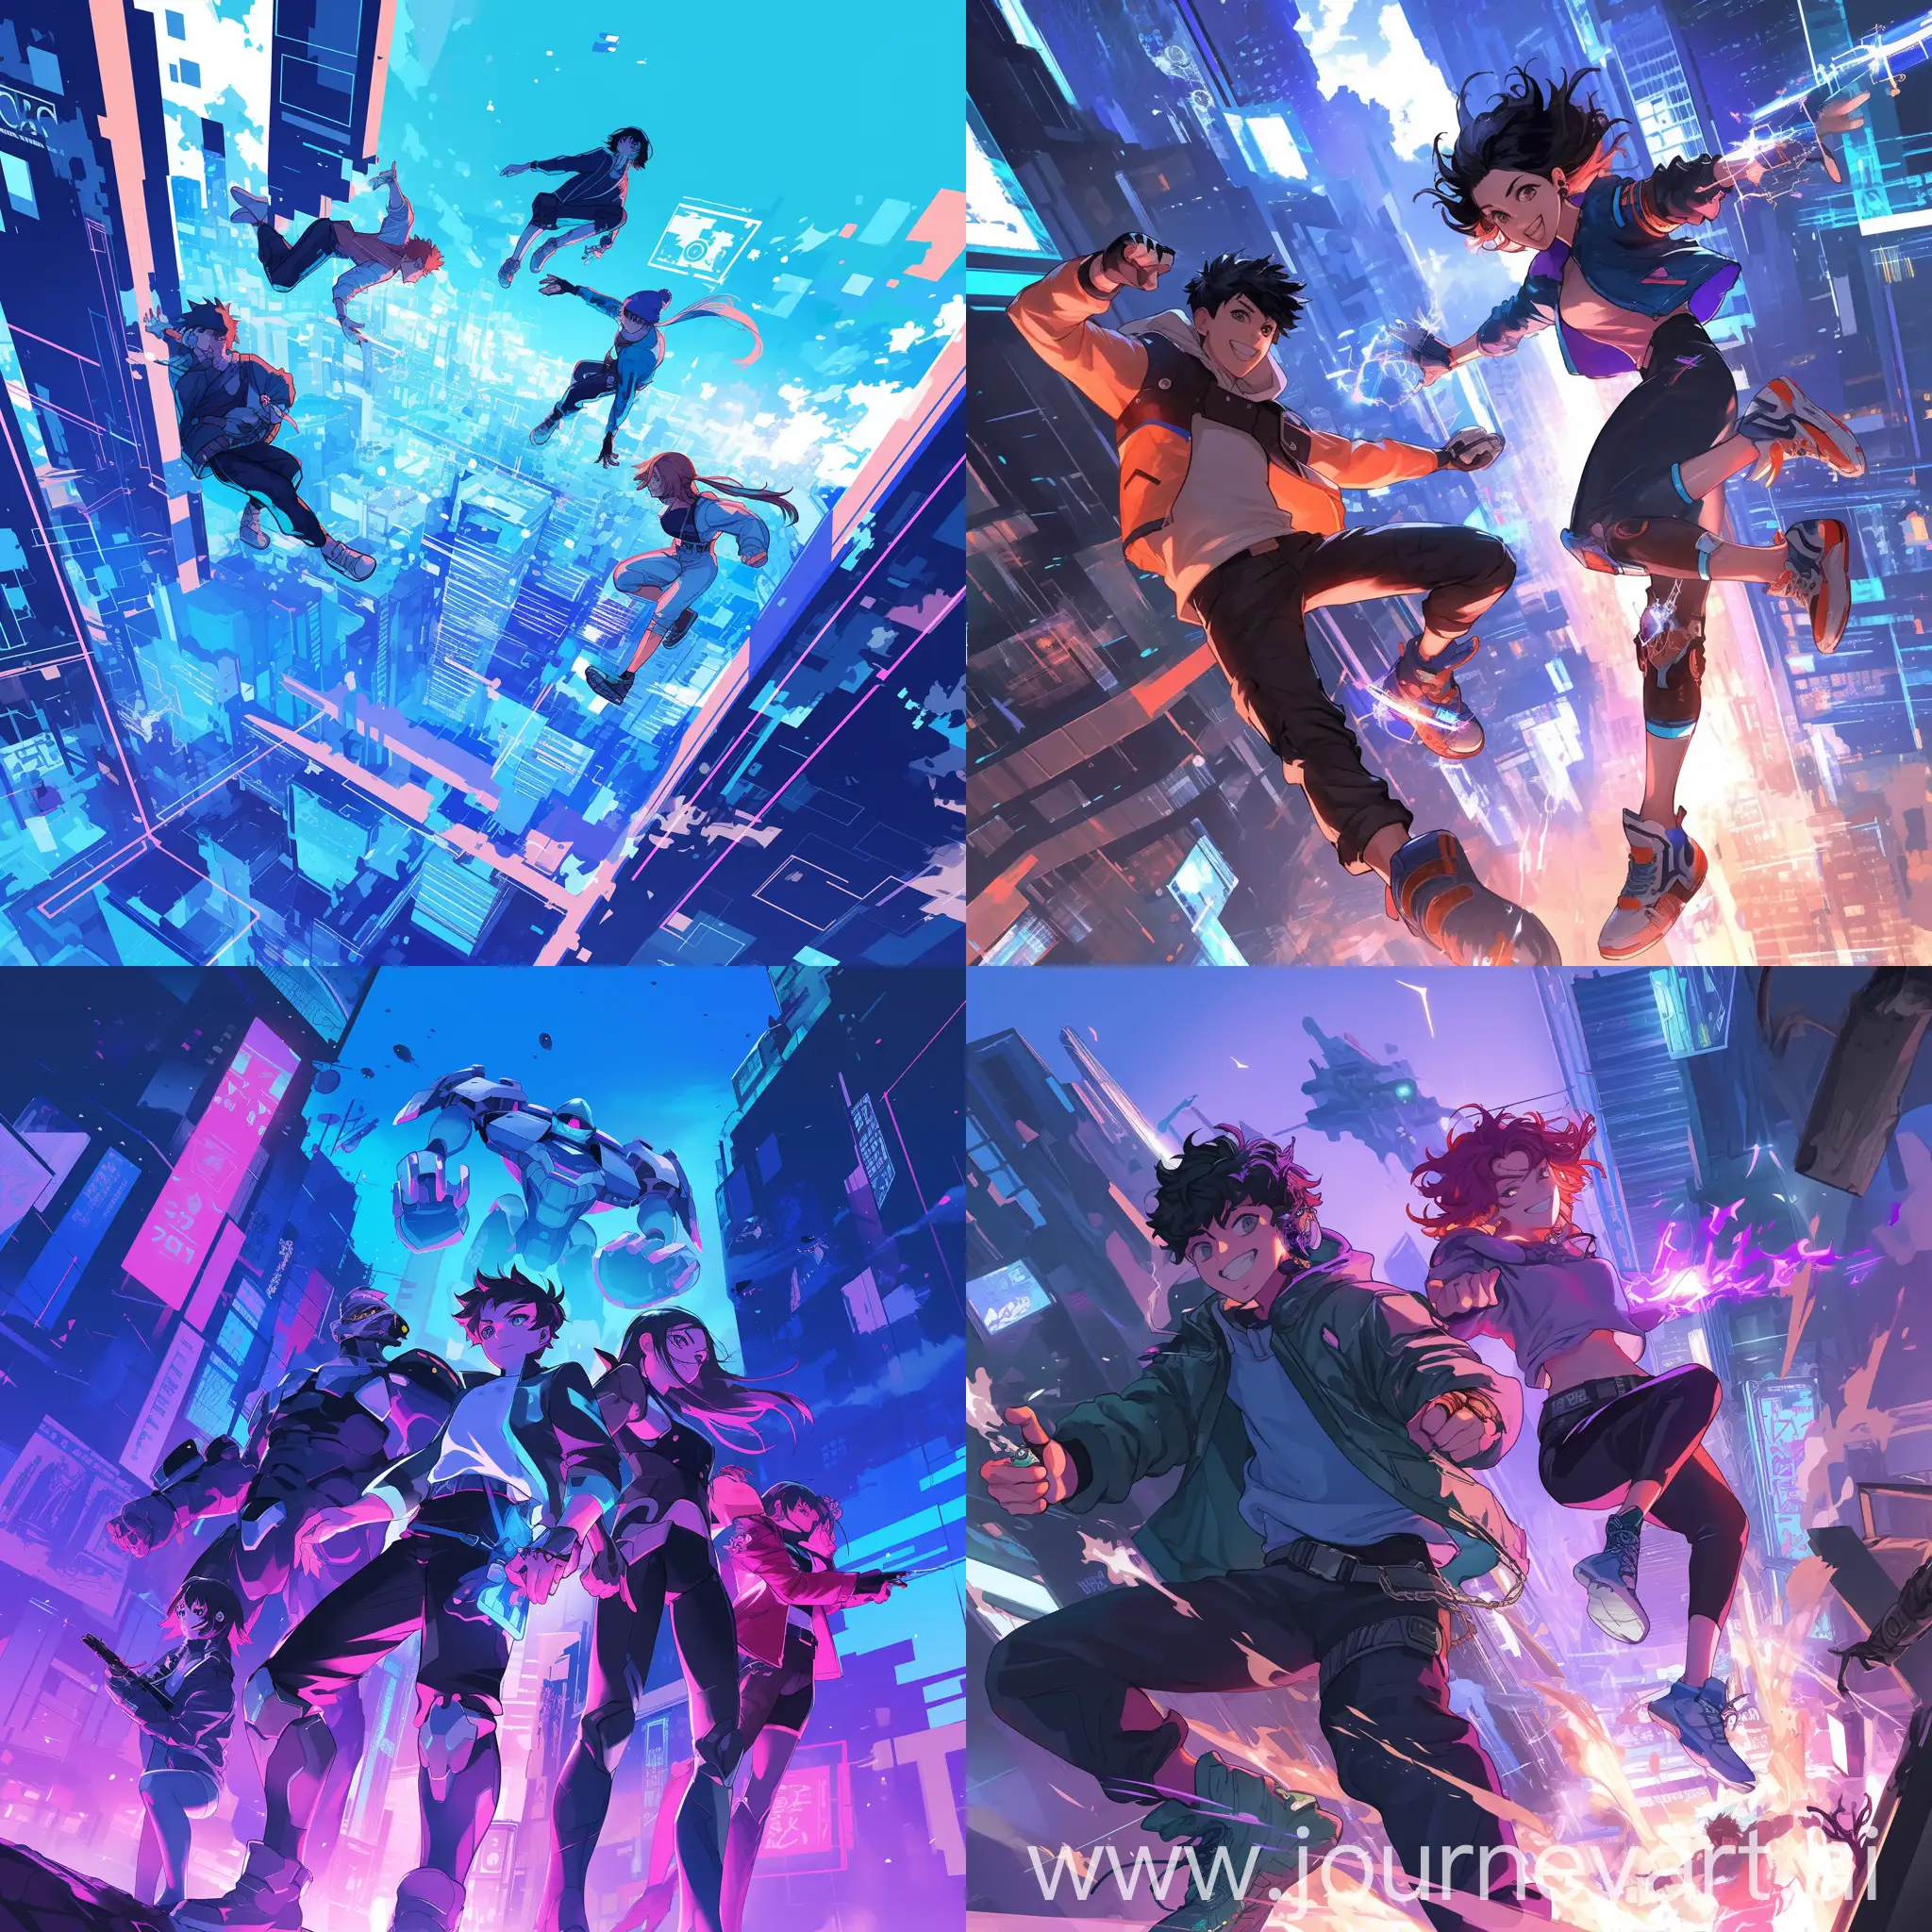 dynamic manga cover featuring teenage heros, futuristic cityscapem and vibrant action scenes. bold color, sleek design for young readers --niji 6